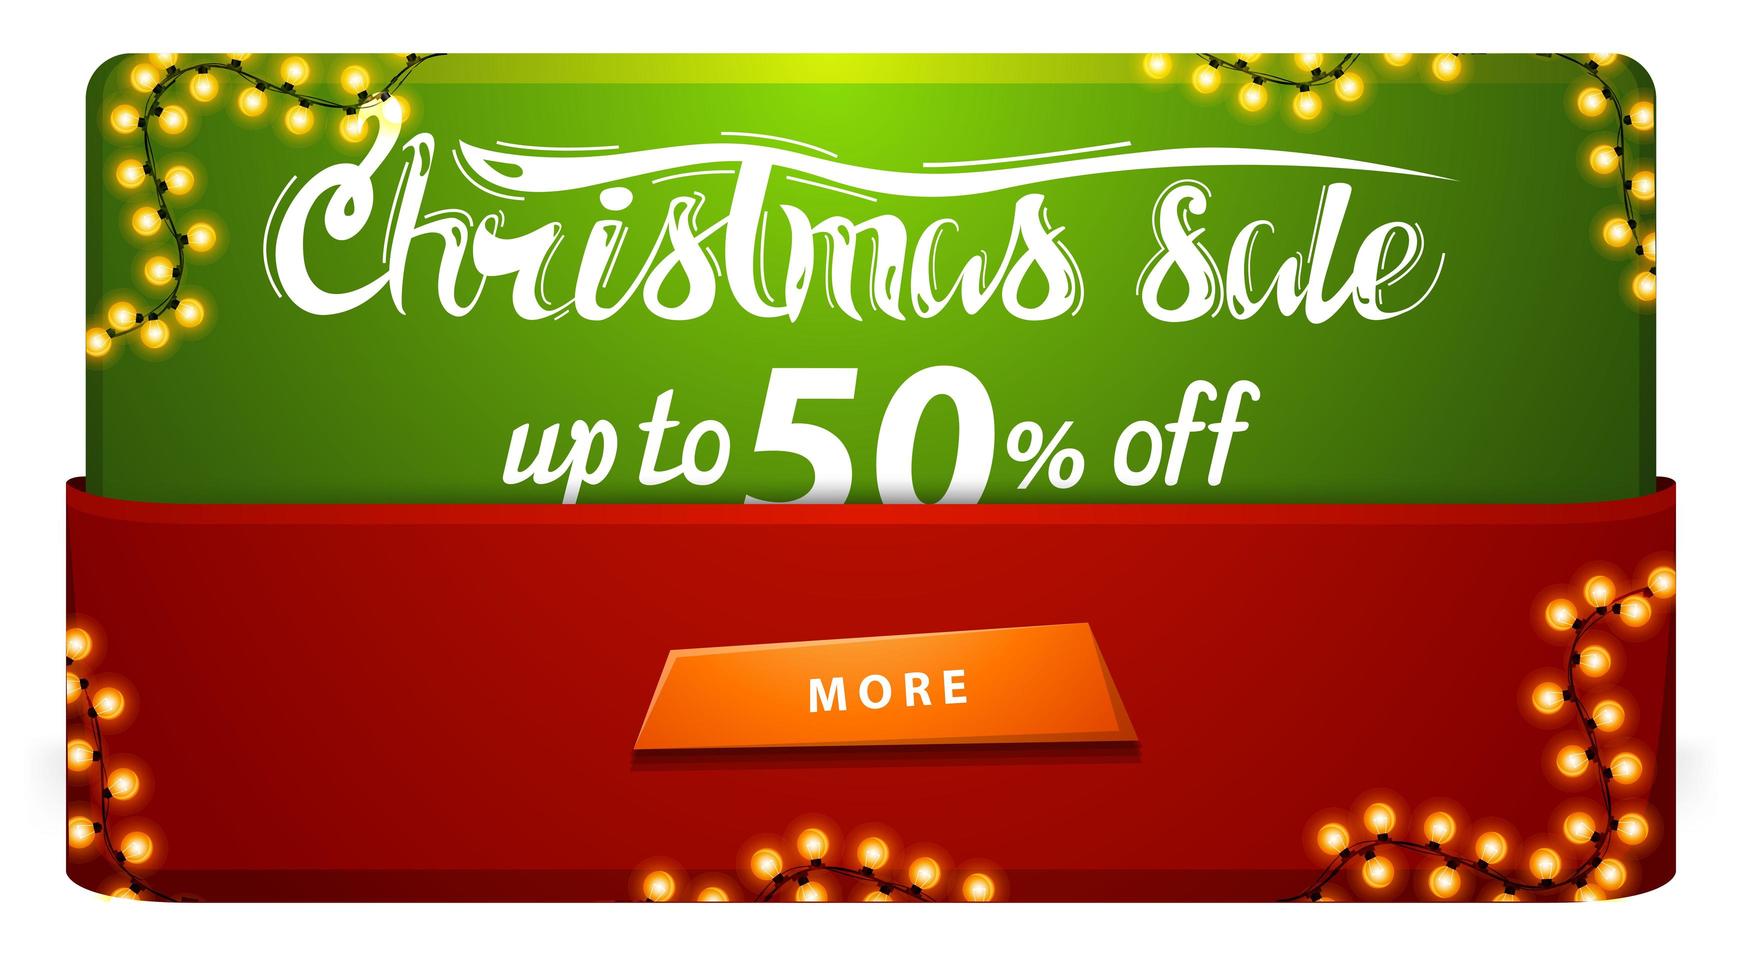 Christmas sale, up to 50 off, red and green discount banner with garland and button. vector